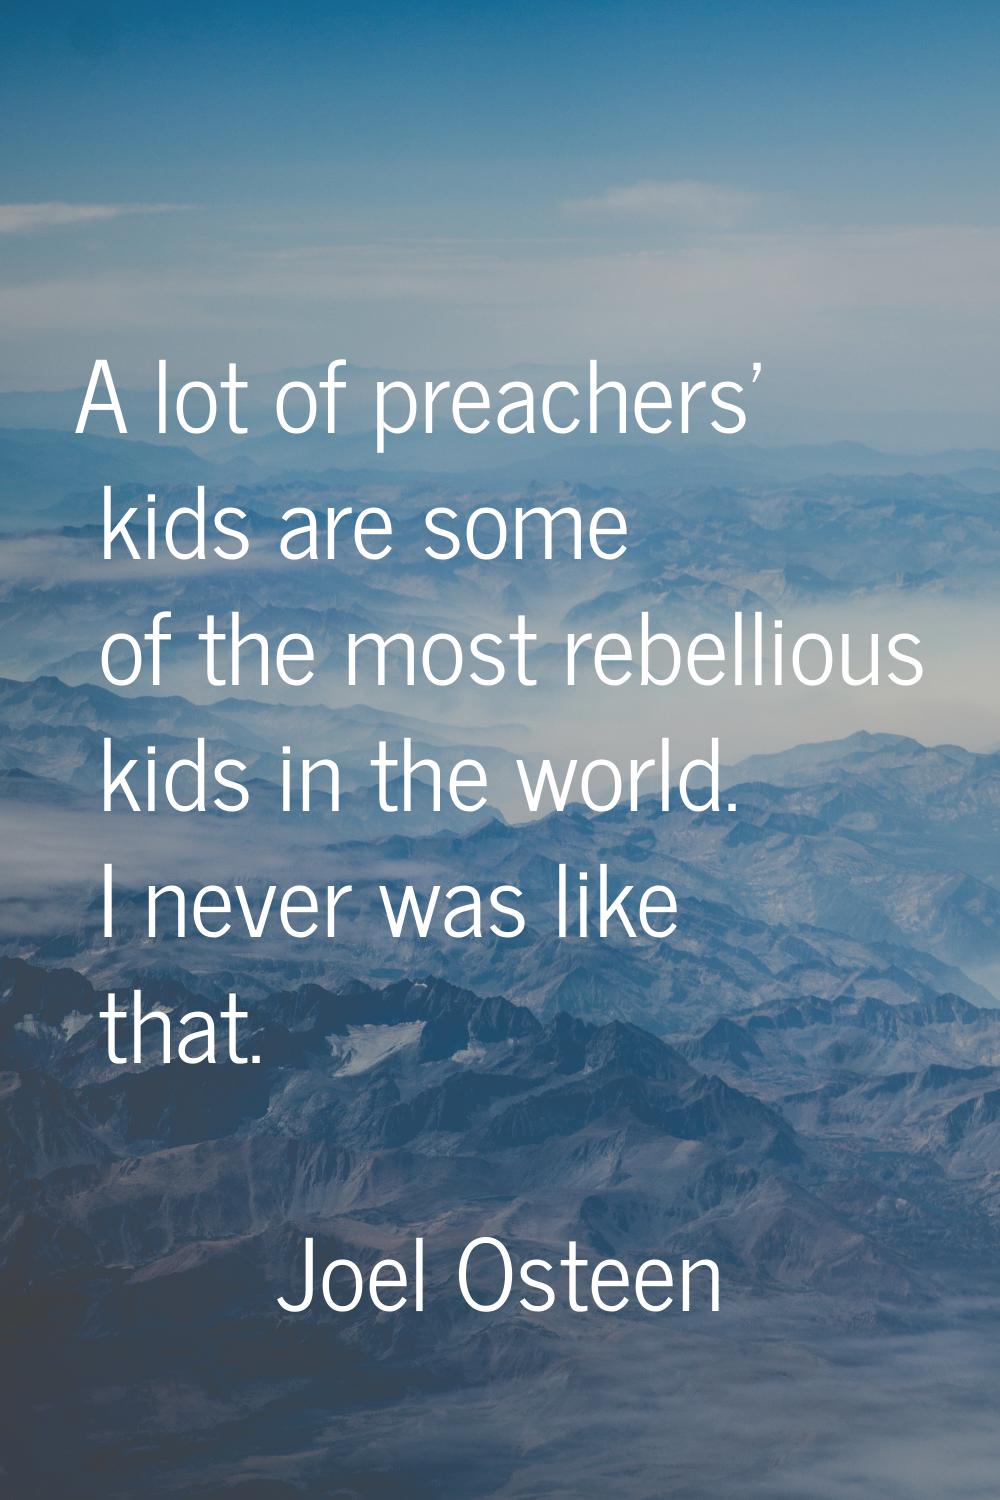 A lot of preachers' kids are some of the most rebellious kids in the world. I never was like that.